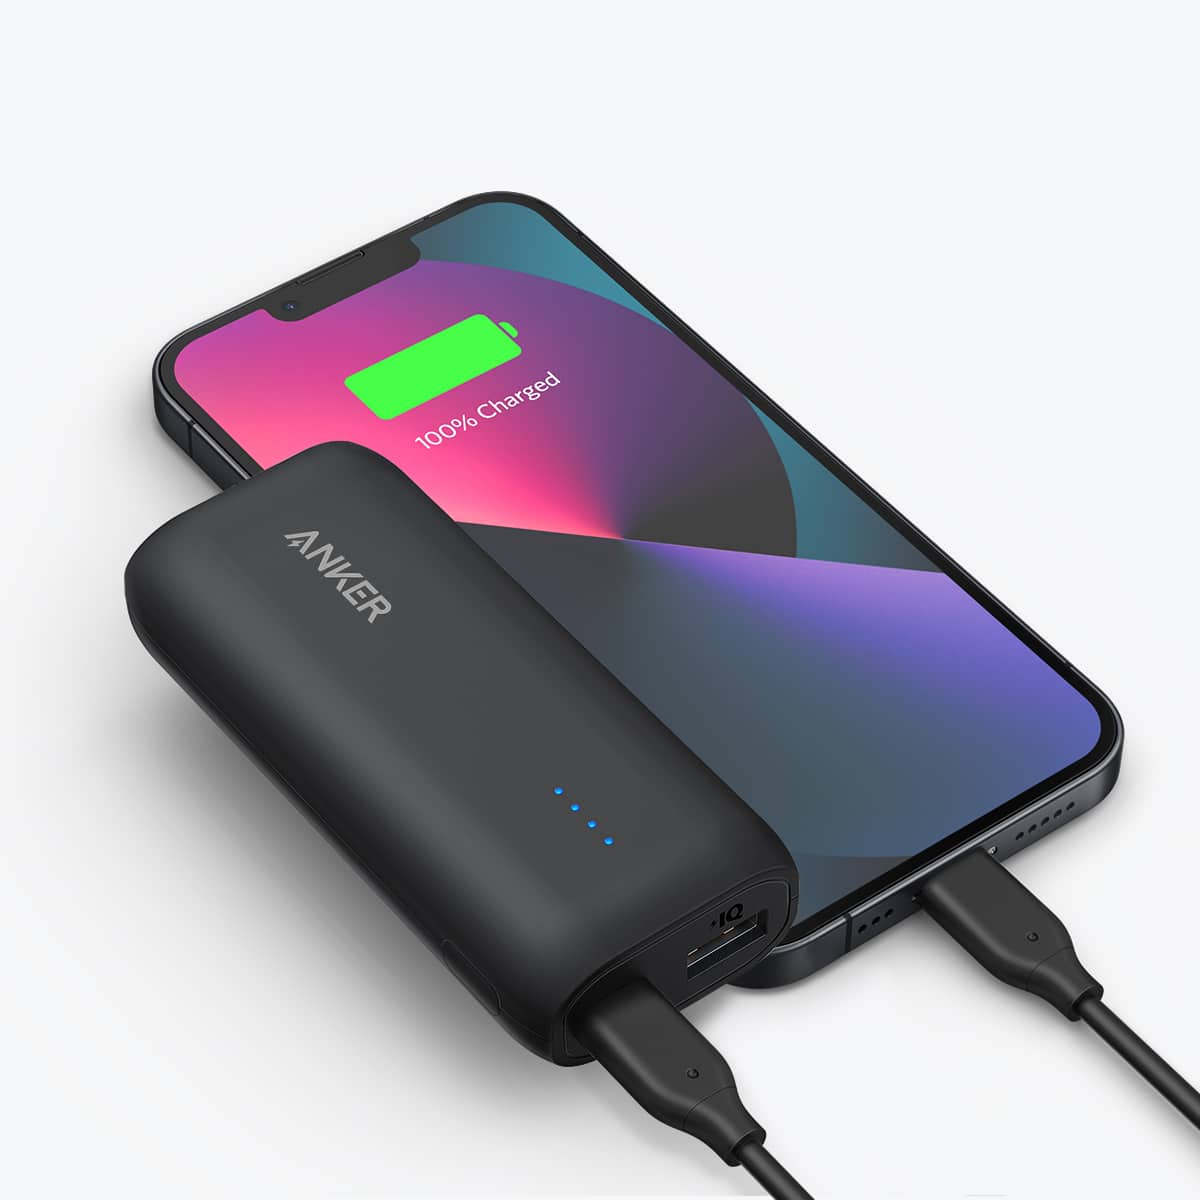 Anker 321 Power Bank - one of the best portable chargers